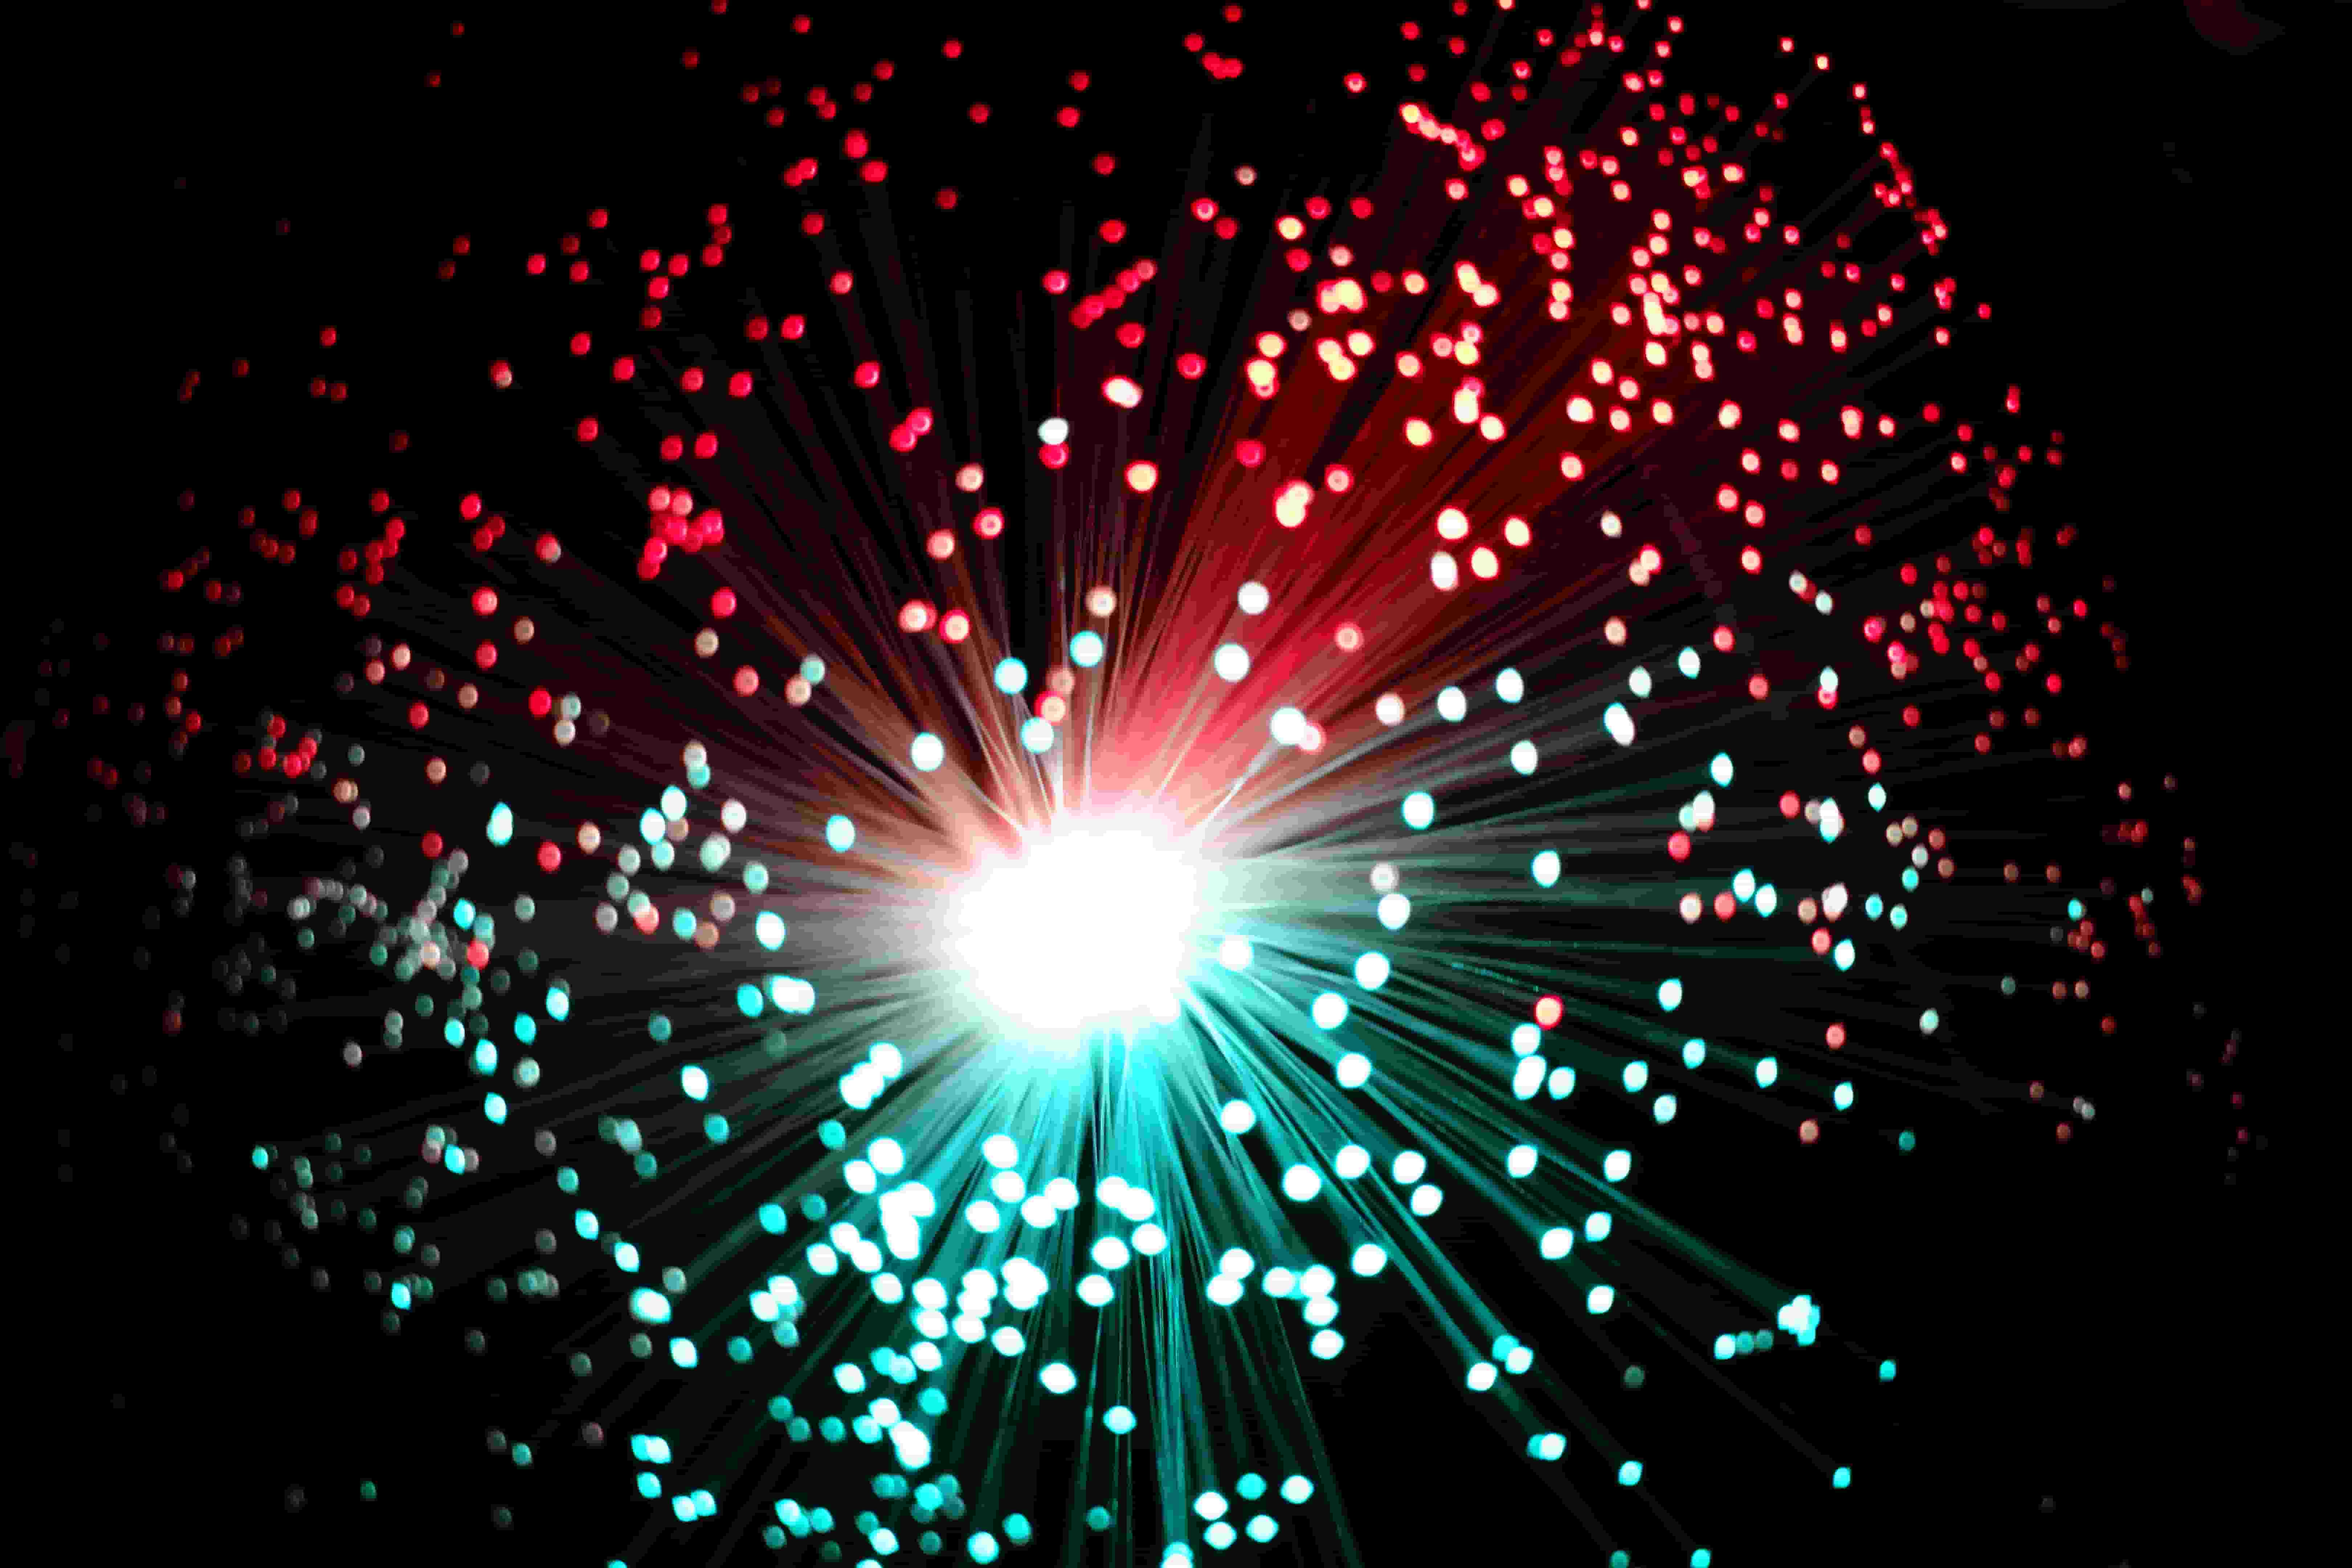 About the definition of optical fiber